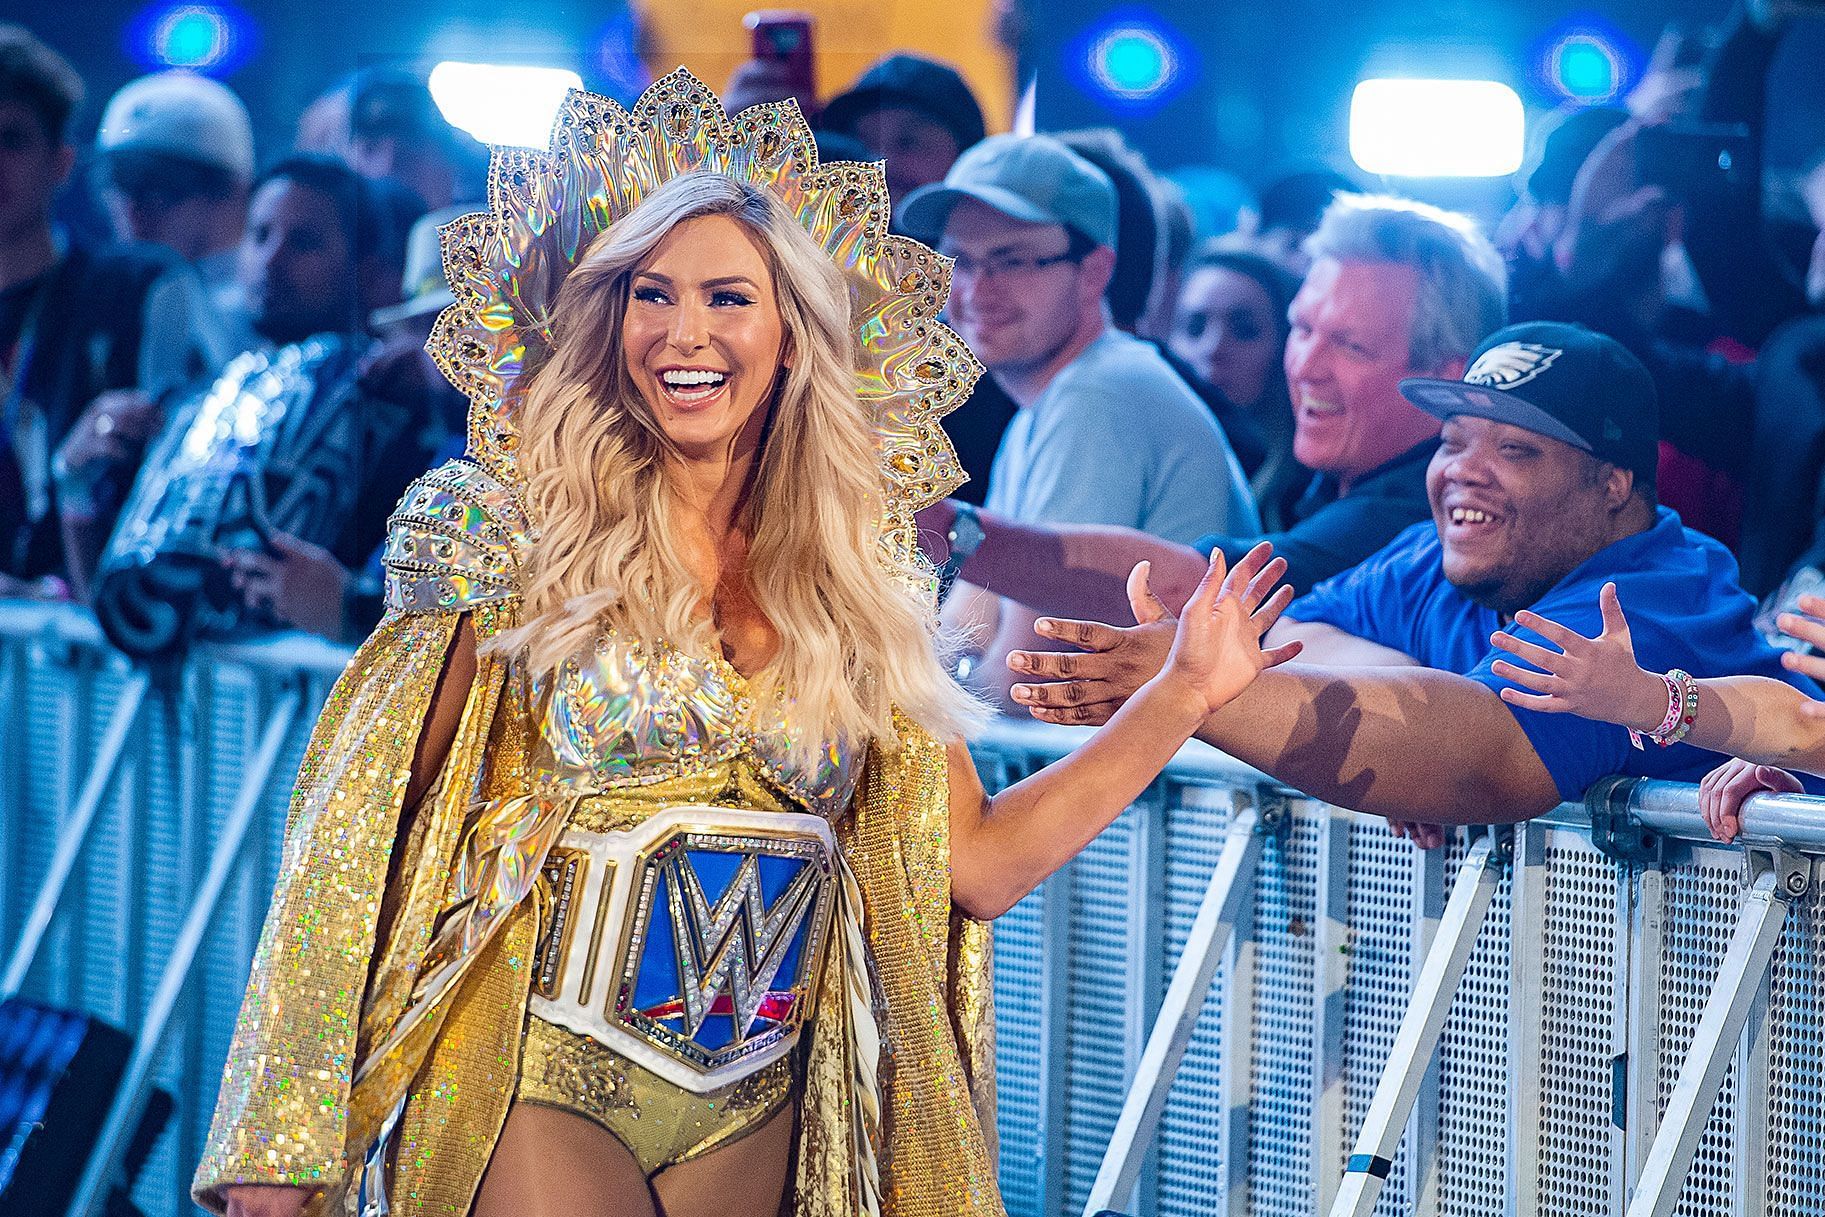 Charlotte Flair is currently absent from WWE programming